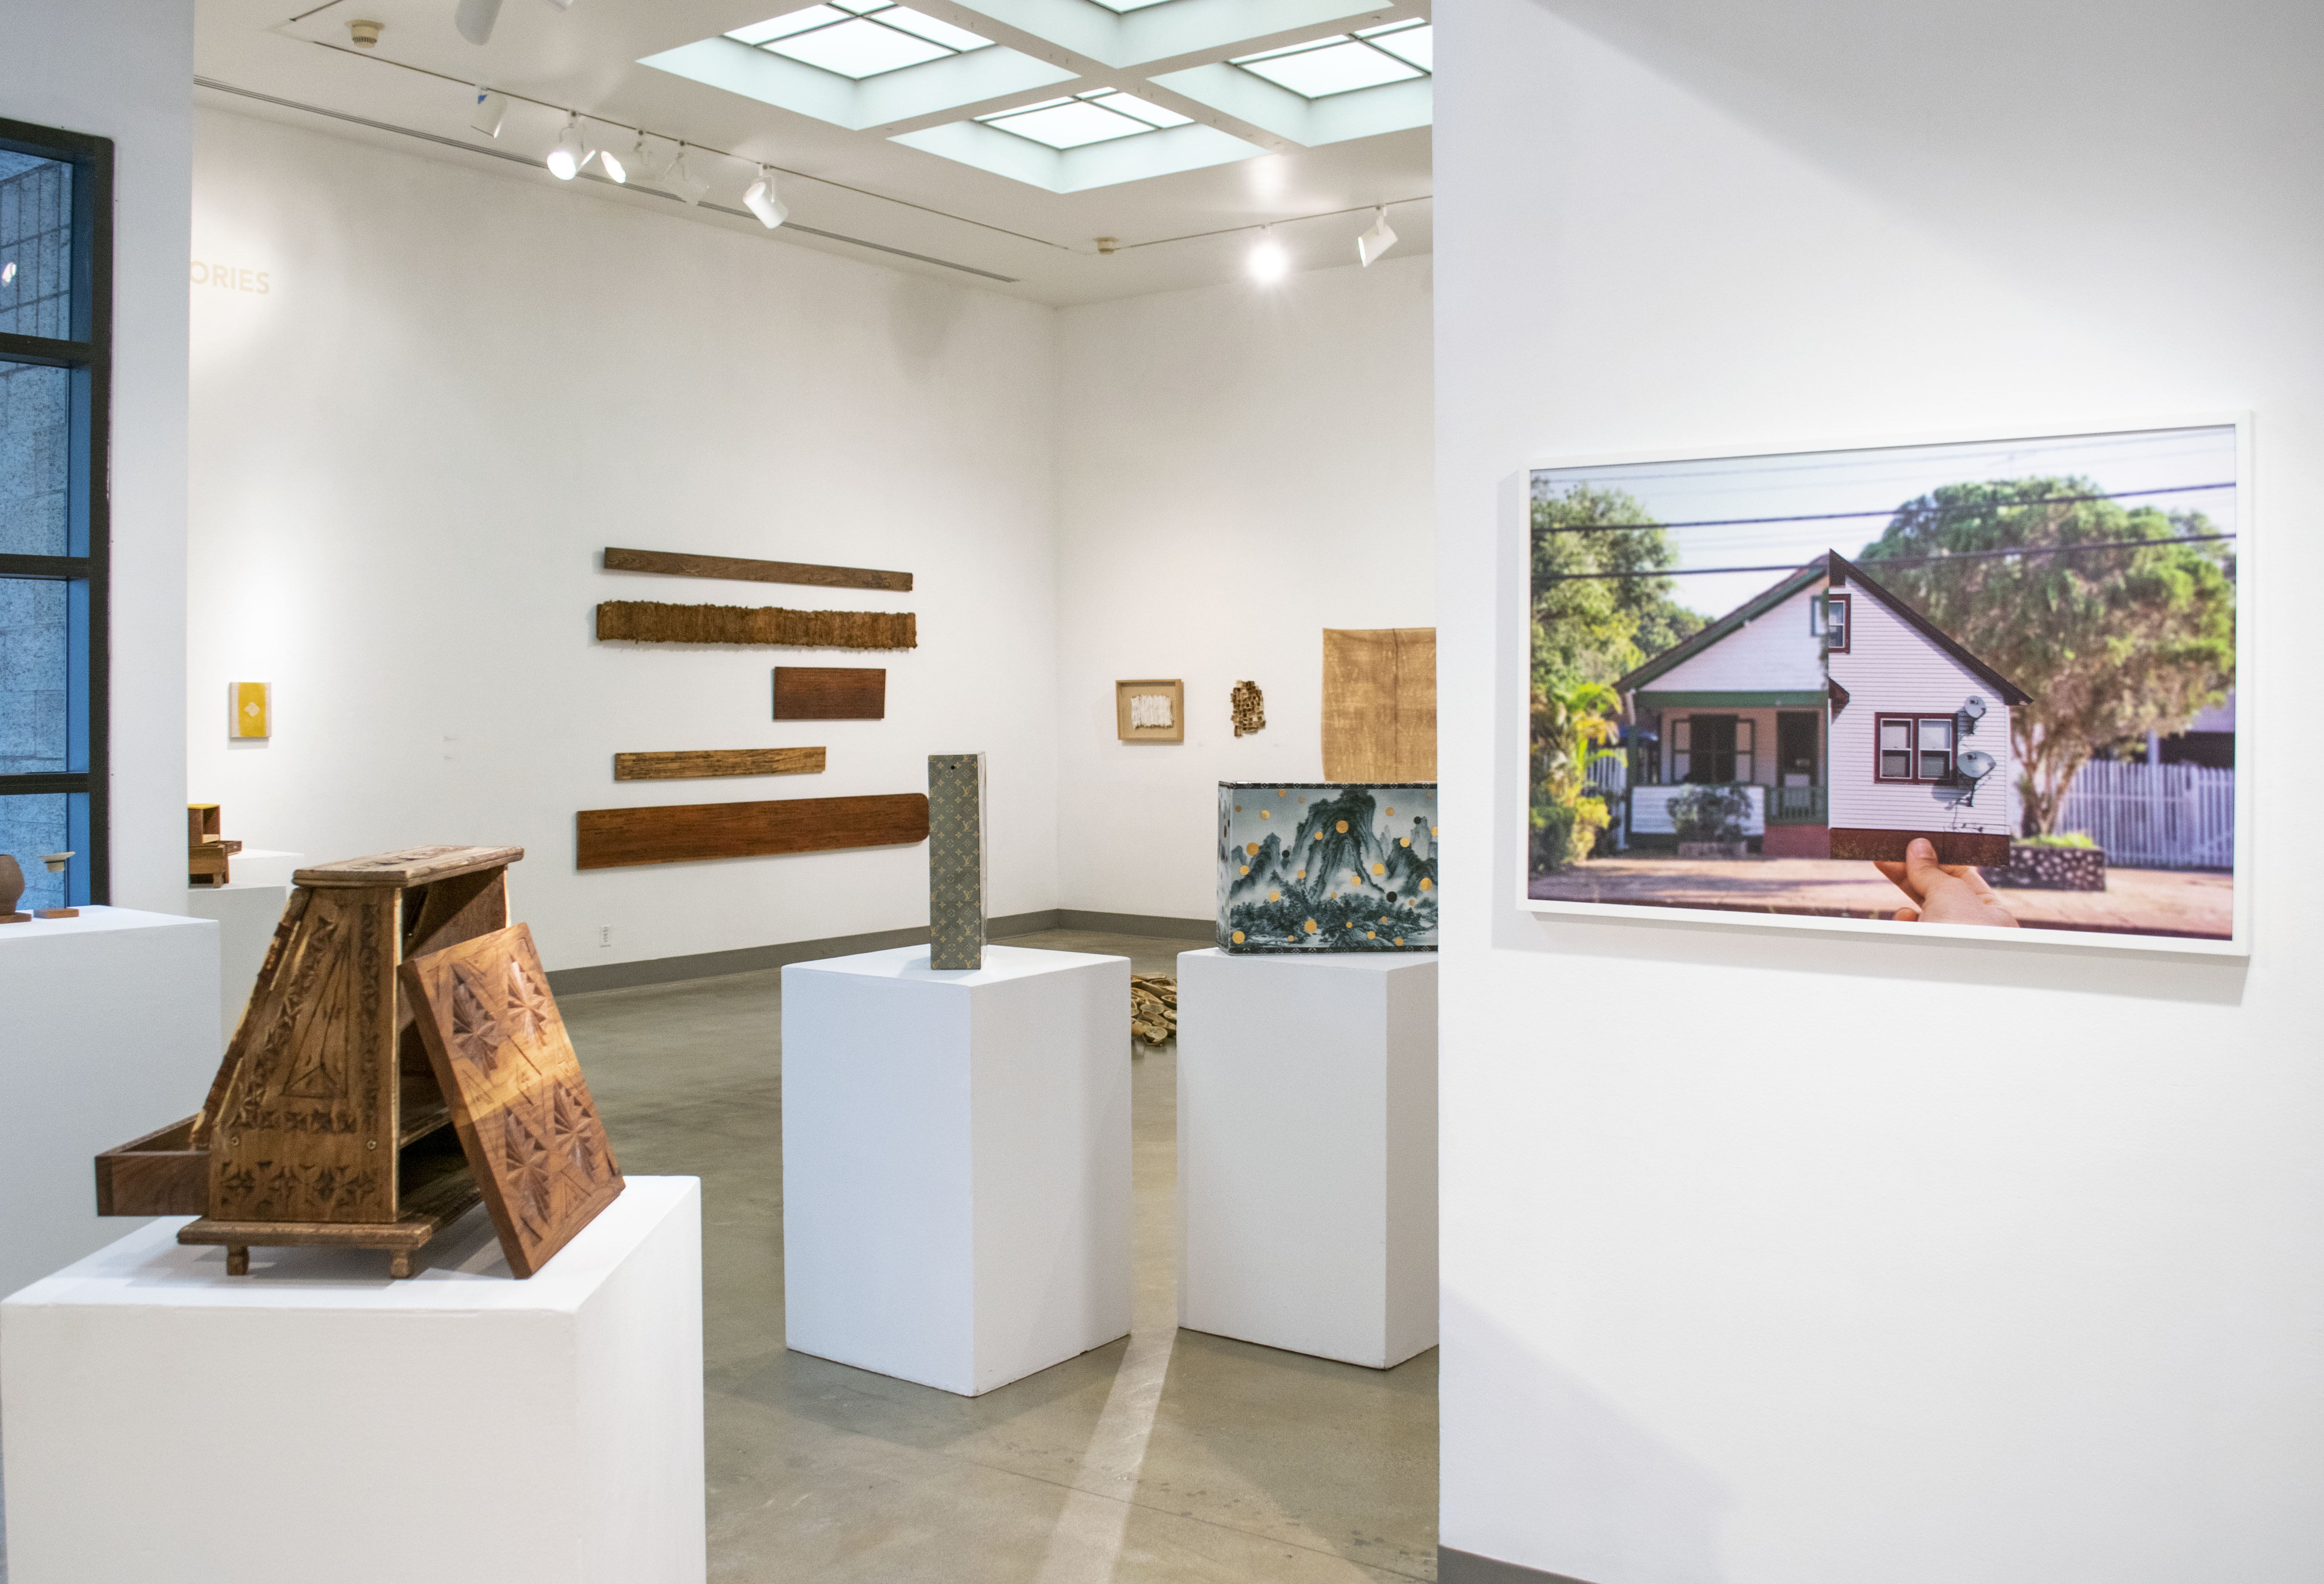 Front East Gallery, Exhibition: Somewhere In Between, Nov 6, 2018 - Mar 17, 2019, Co-curated by Michele Cairella Fillmore & Bia Gayotto, W. Keith & Janet Kellogg Art Gallery, Cal Poly Pomona.